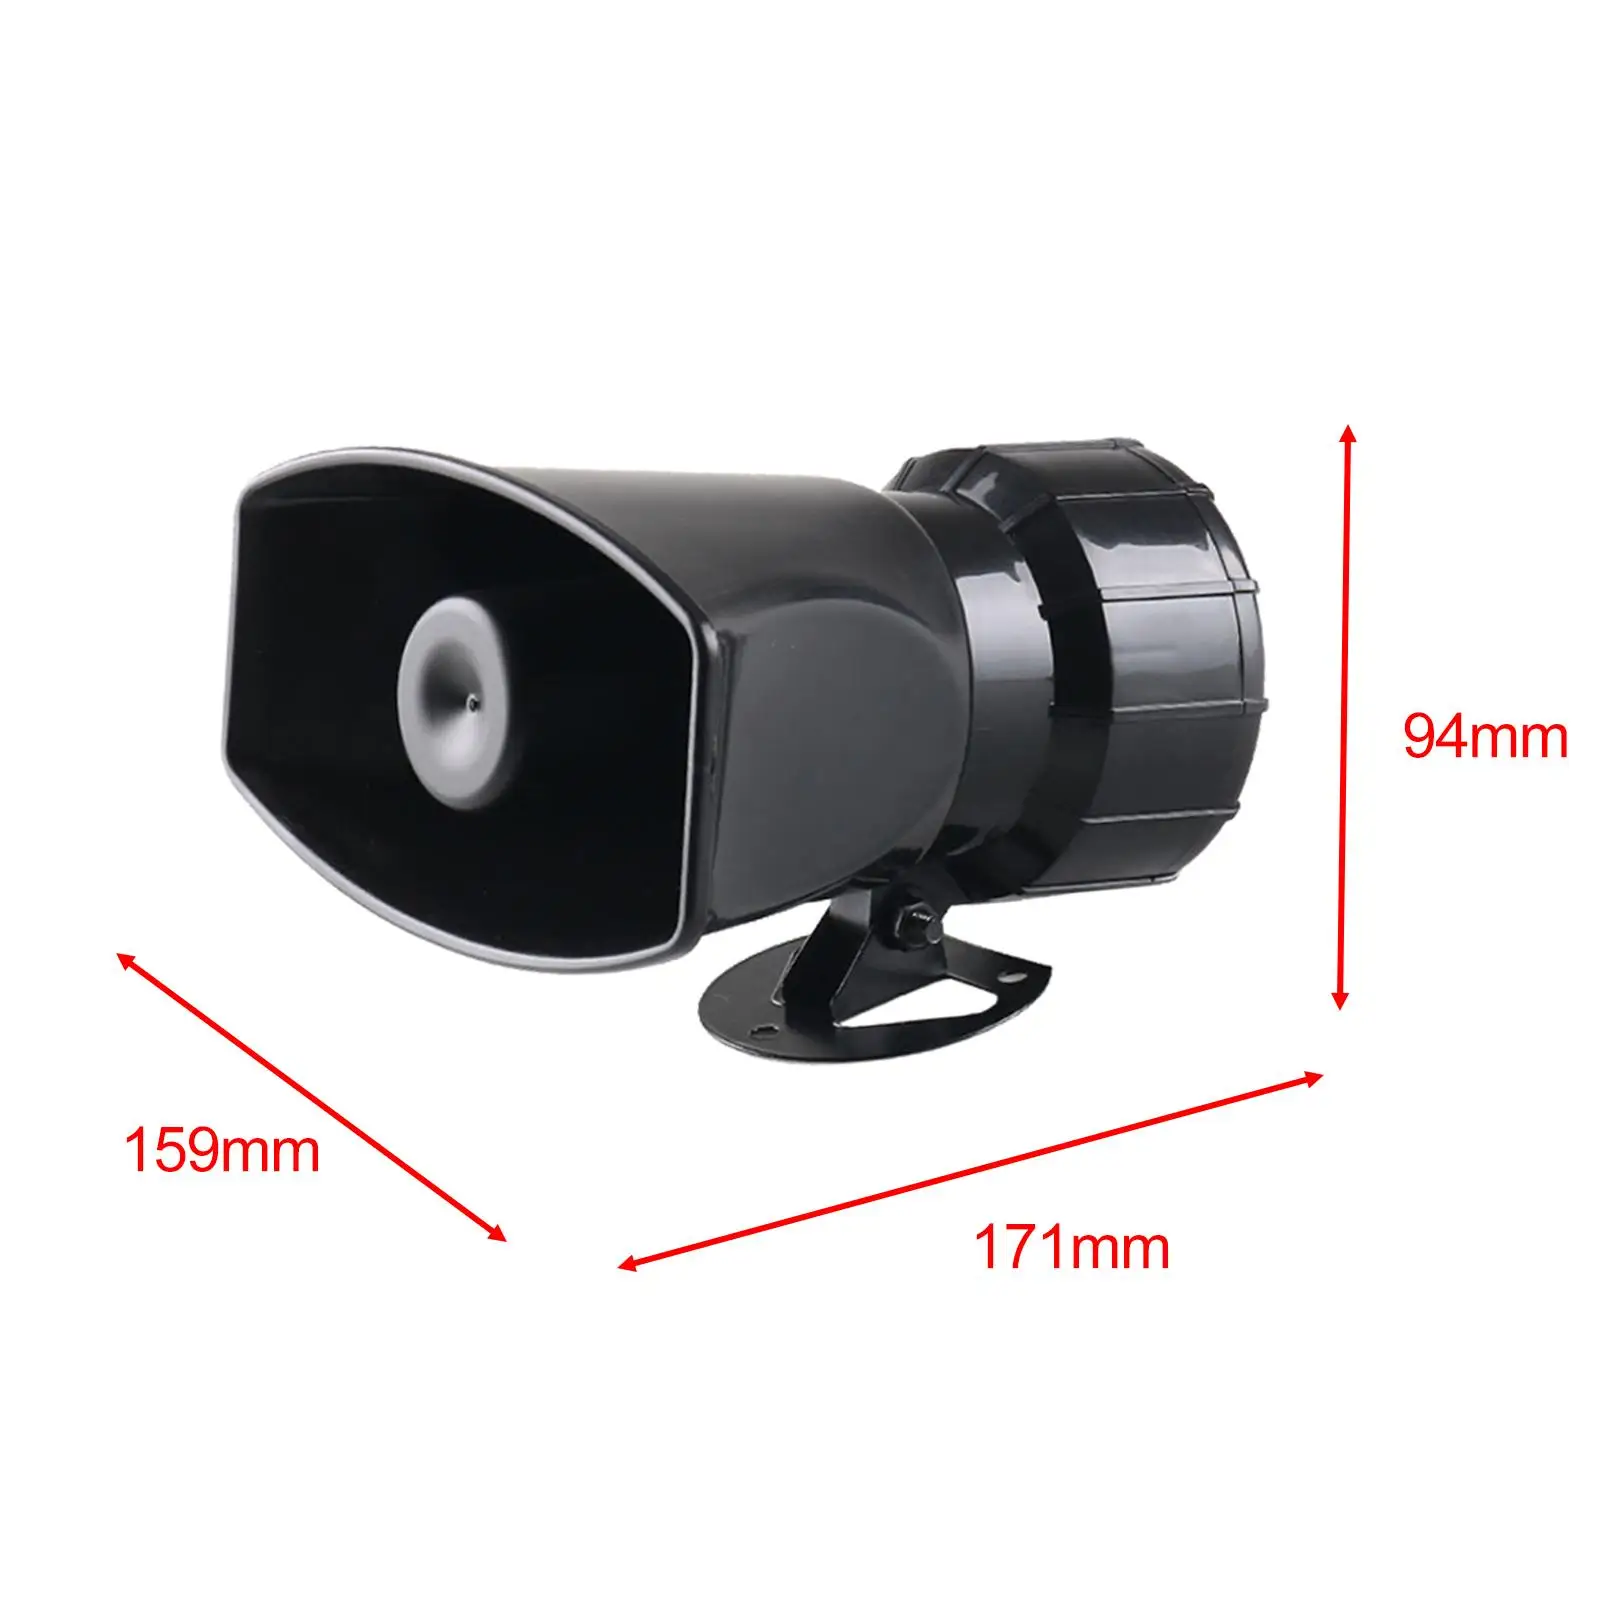 Generic Car Siren Speaker 12V 5 Tone Sound 20W with Microphone Loud Alarm Horn for Motorcycle Automotive Boat Lorry Truck